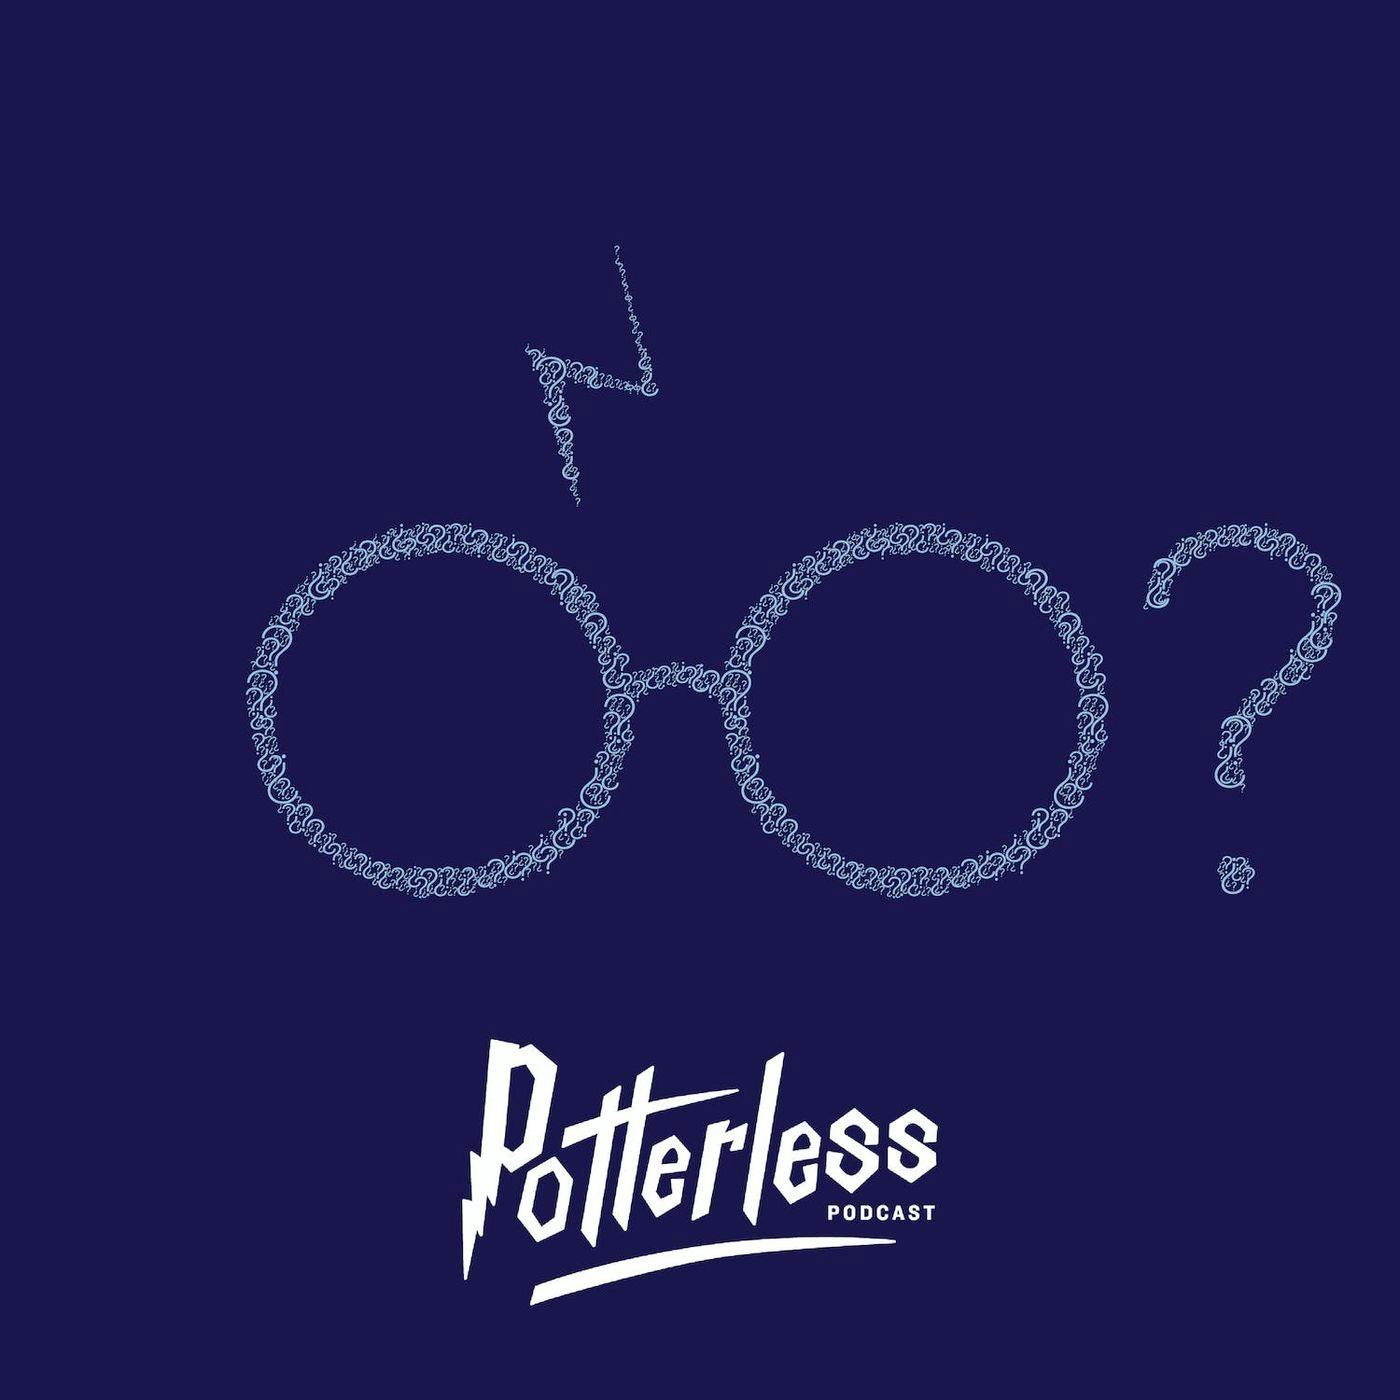 Ep. 193 - What the Heck is the Plot of Harry Potter: Hogwarts Mystery Years 1-3? (LIVE in Pittsburgh!)